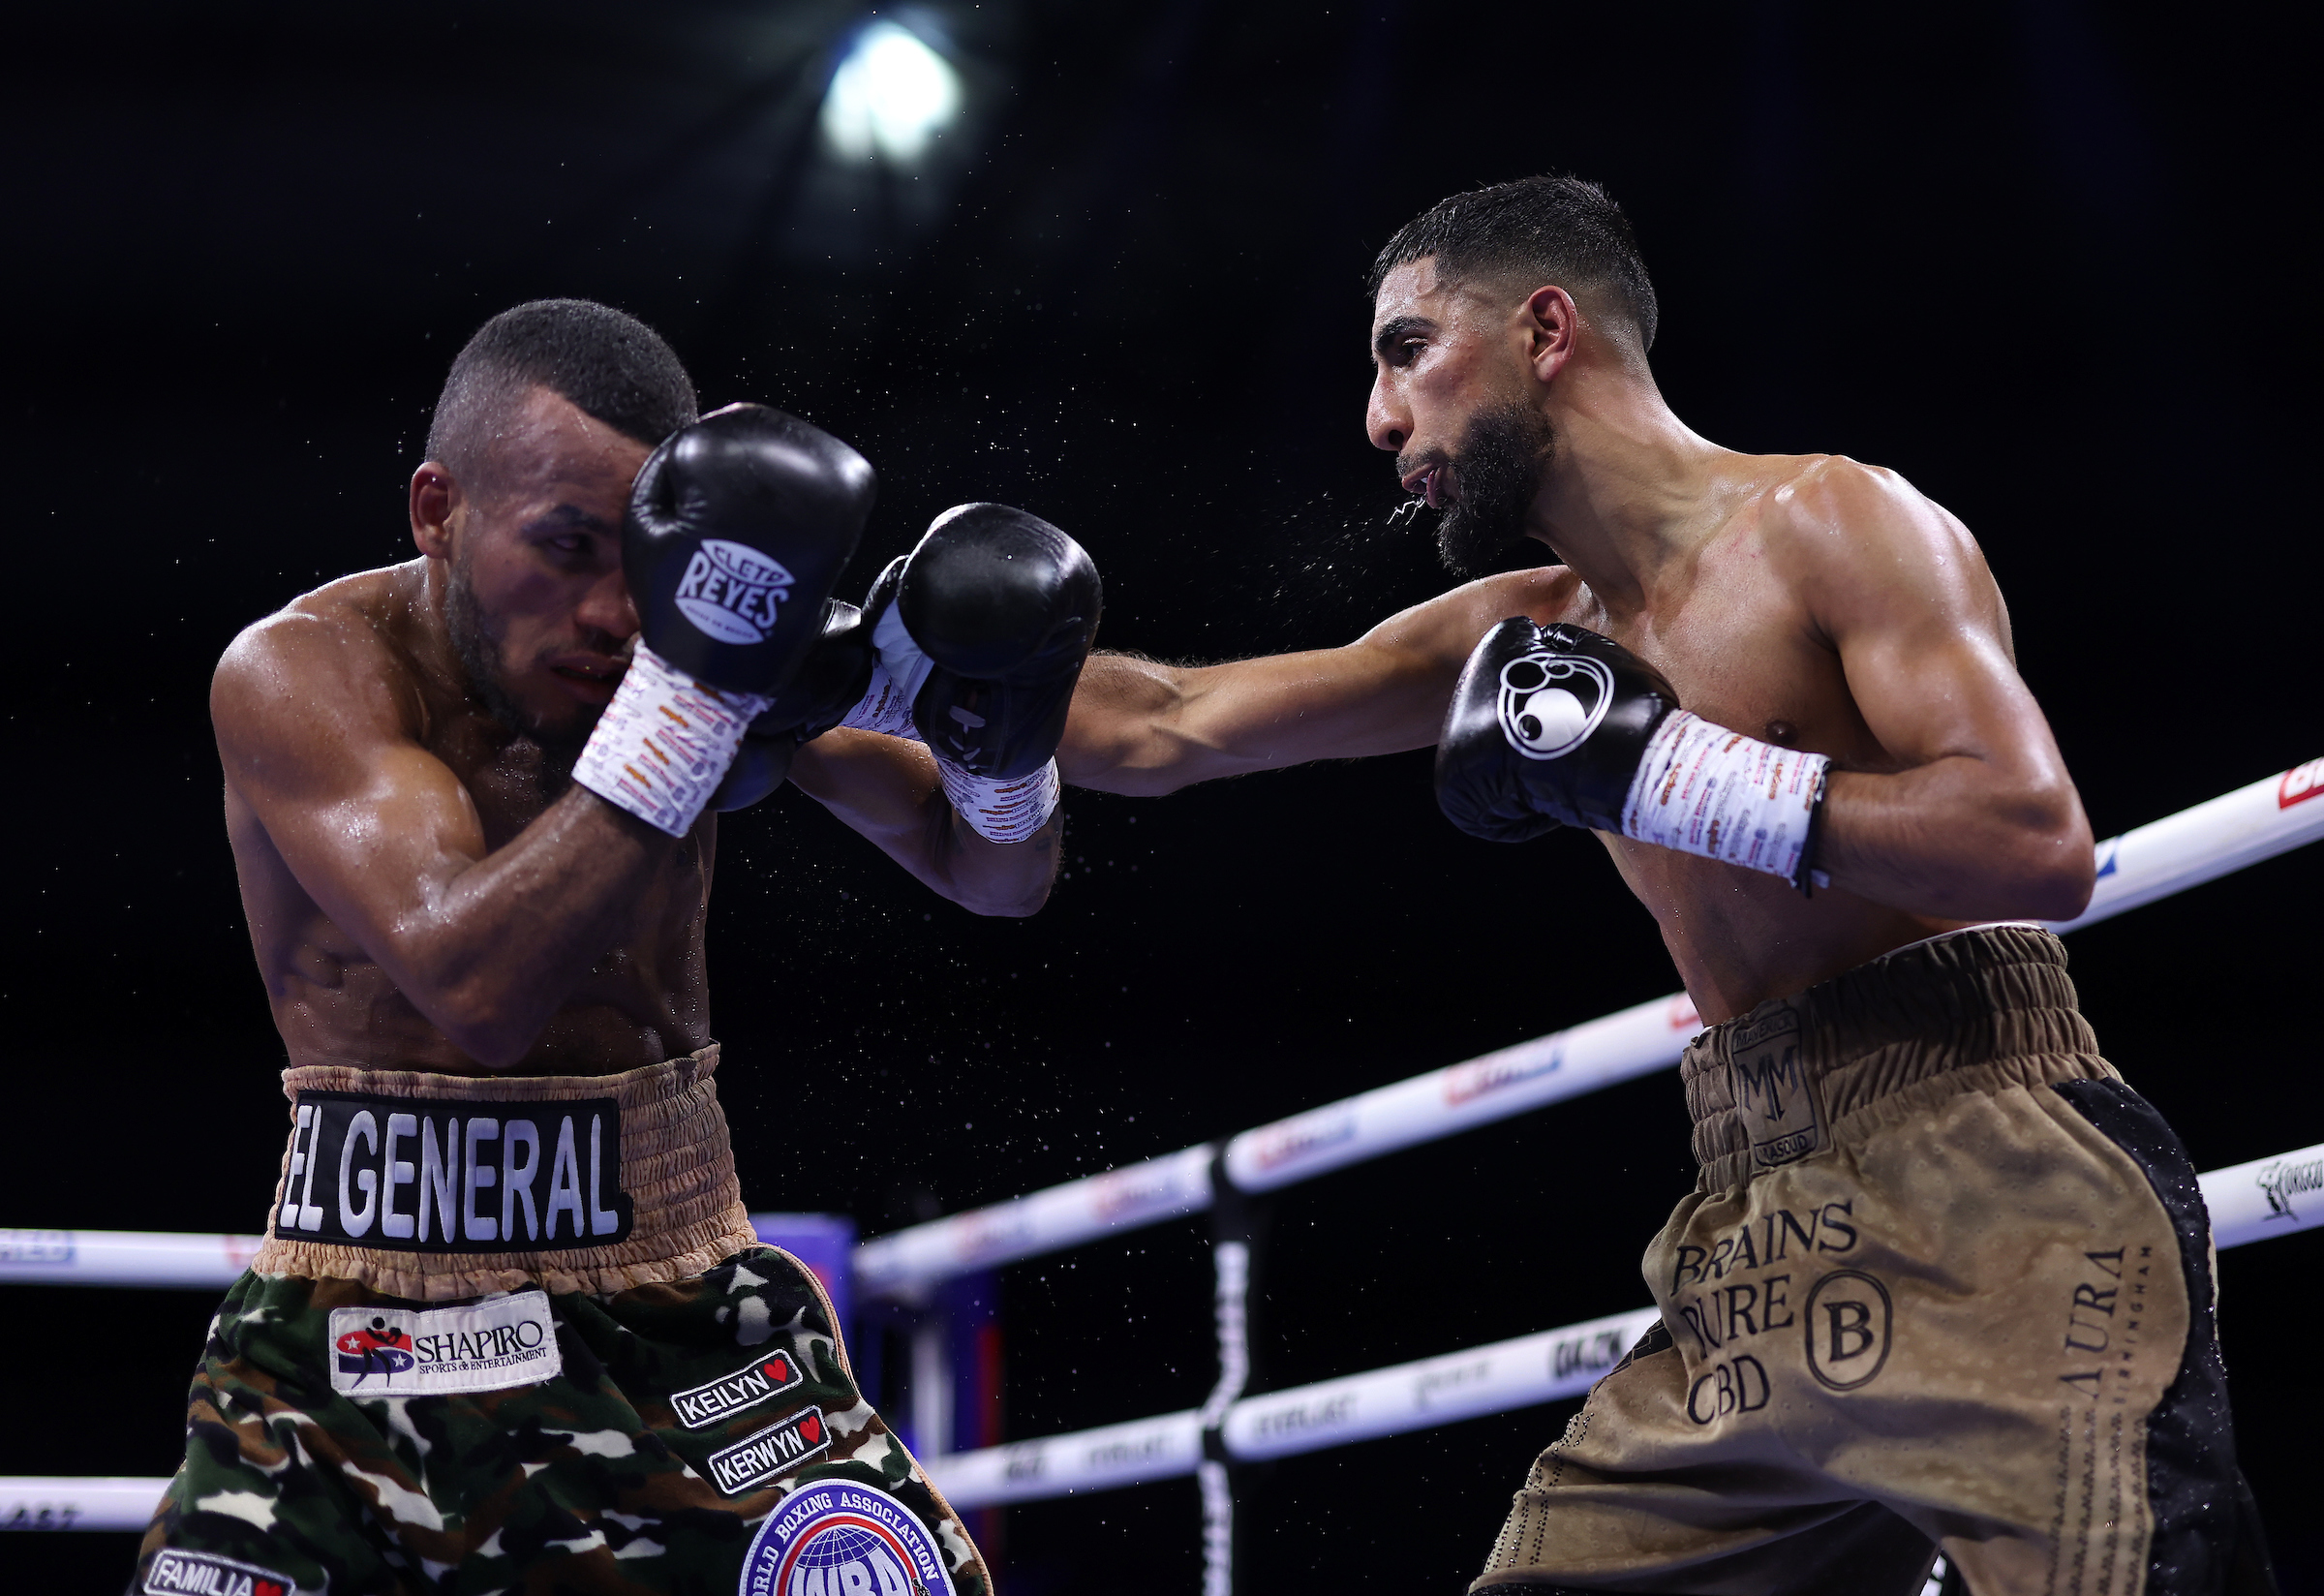 Shabaz Masoud claims split decision over Sanmartin in Newcastle to claim WBA rating 